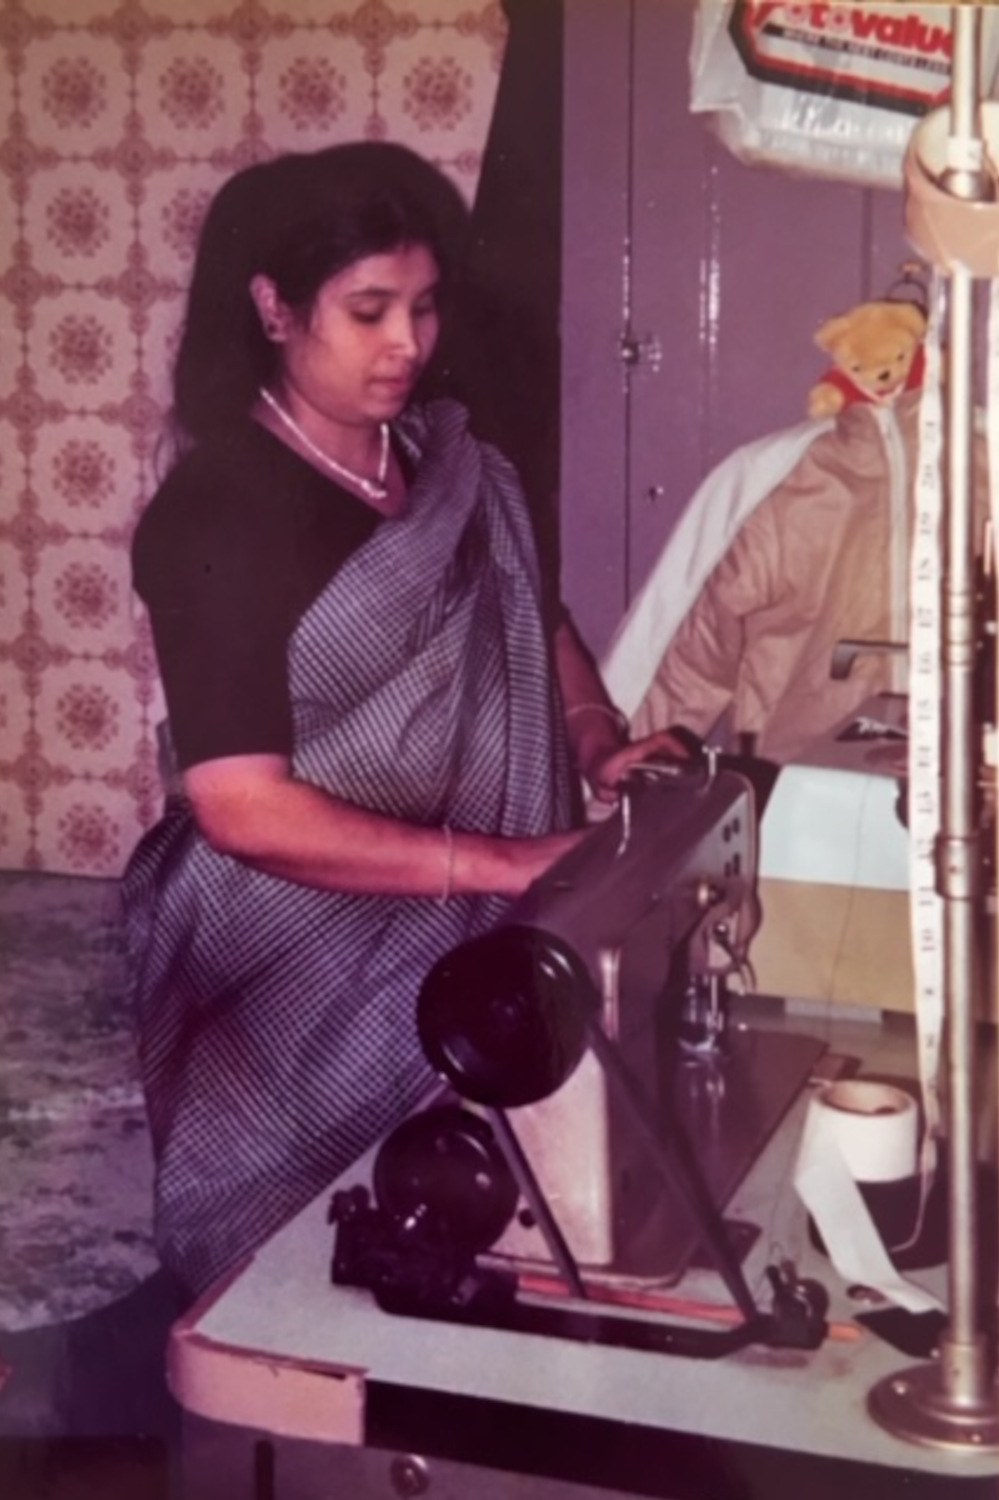 Bangladeshi seamstress Anwara Begum stands working at a sewing machine in her home in Shoreditch, East London